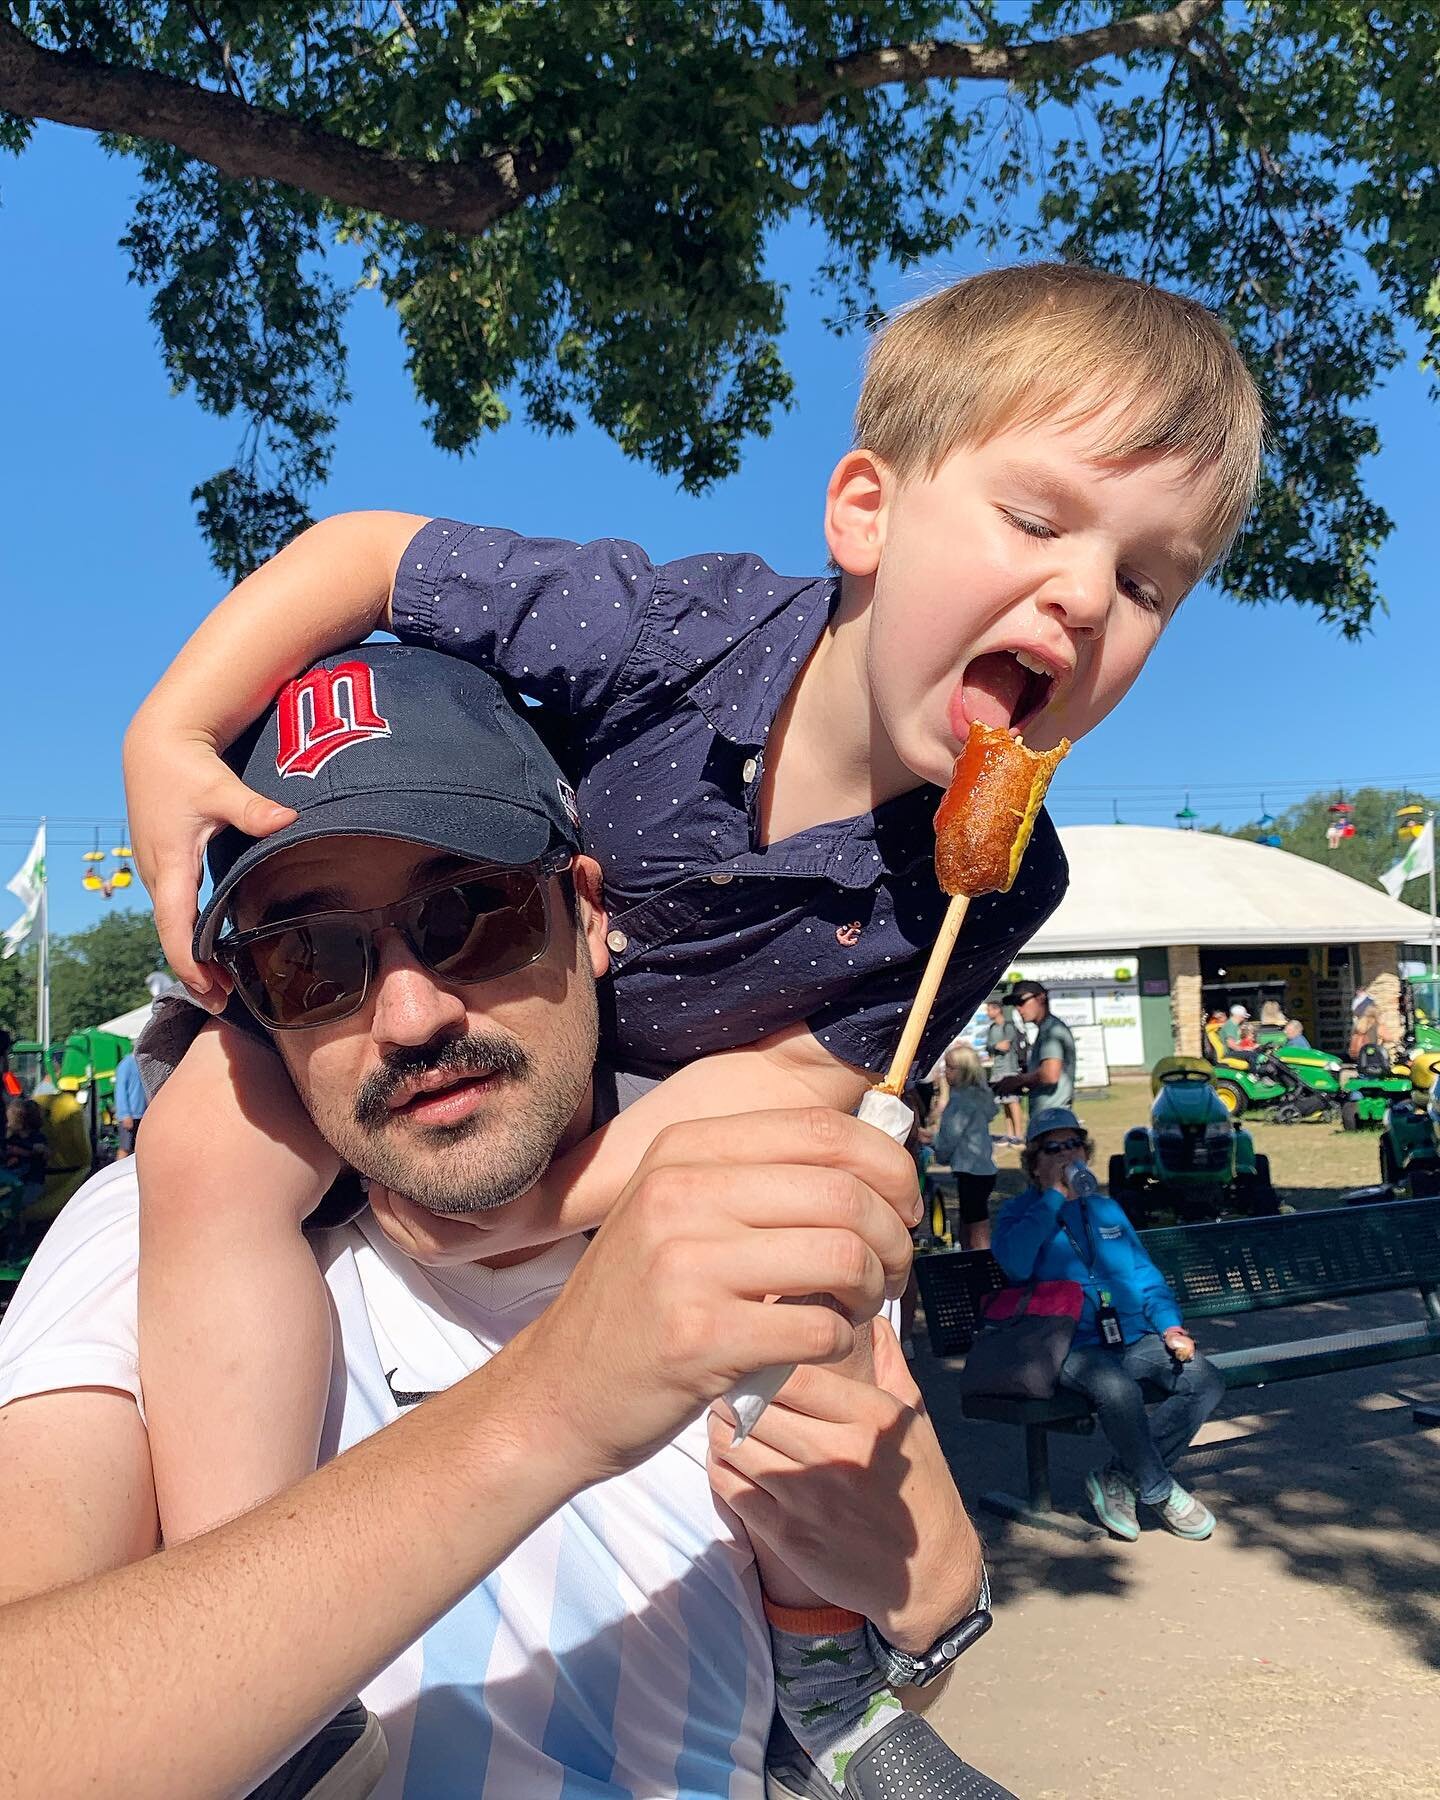 Food on a stick, sunshine, messy faces and exhausted children. State Fair 2022 FTW.